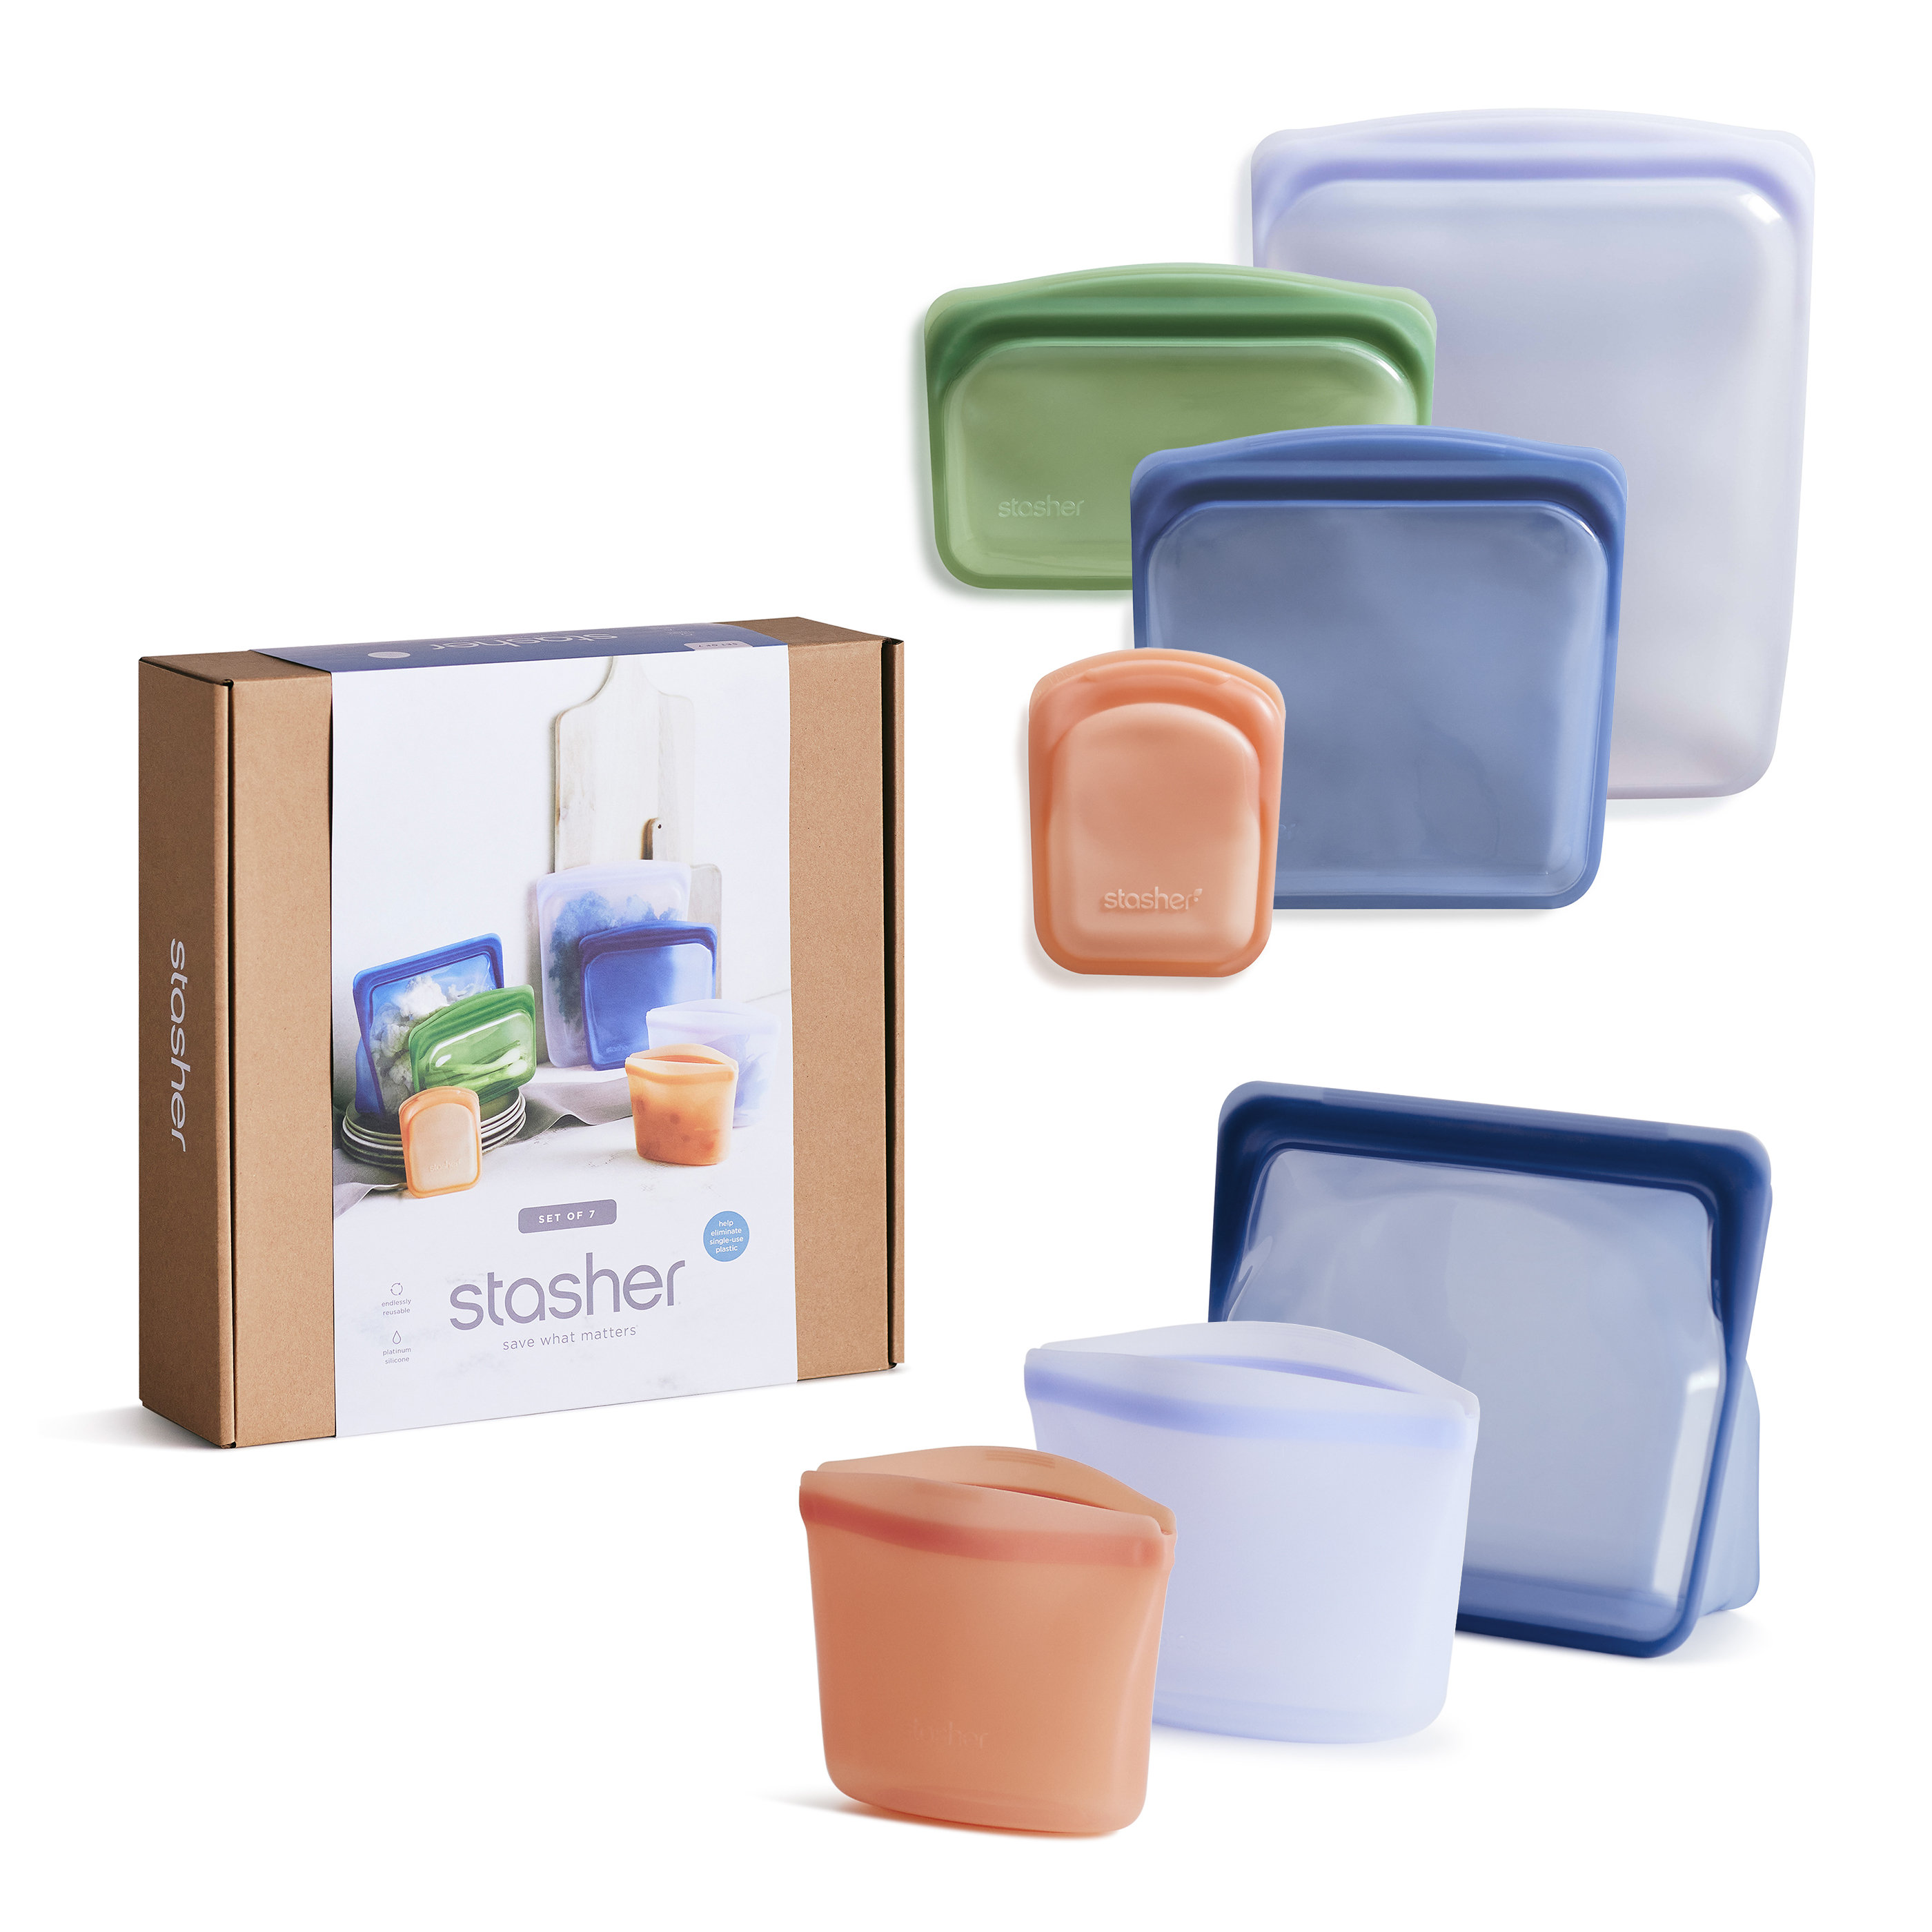 Stasher Bags - A Plastic-Free Food Storage Alternative - The